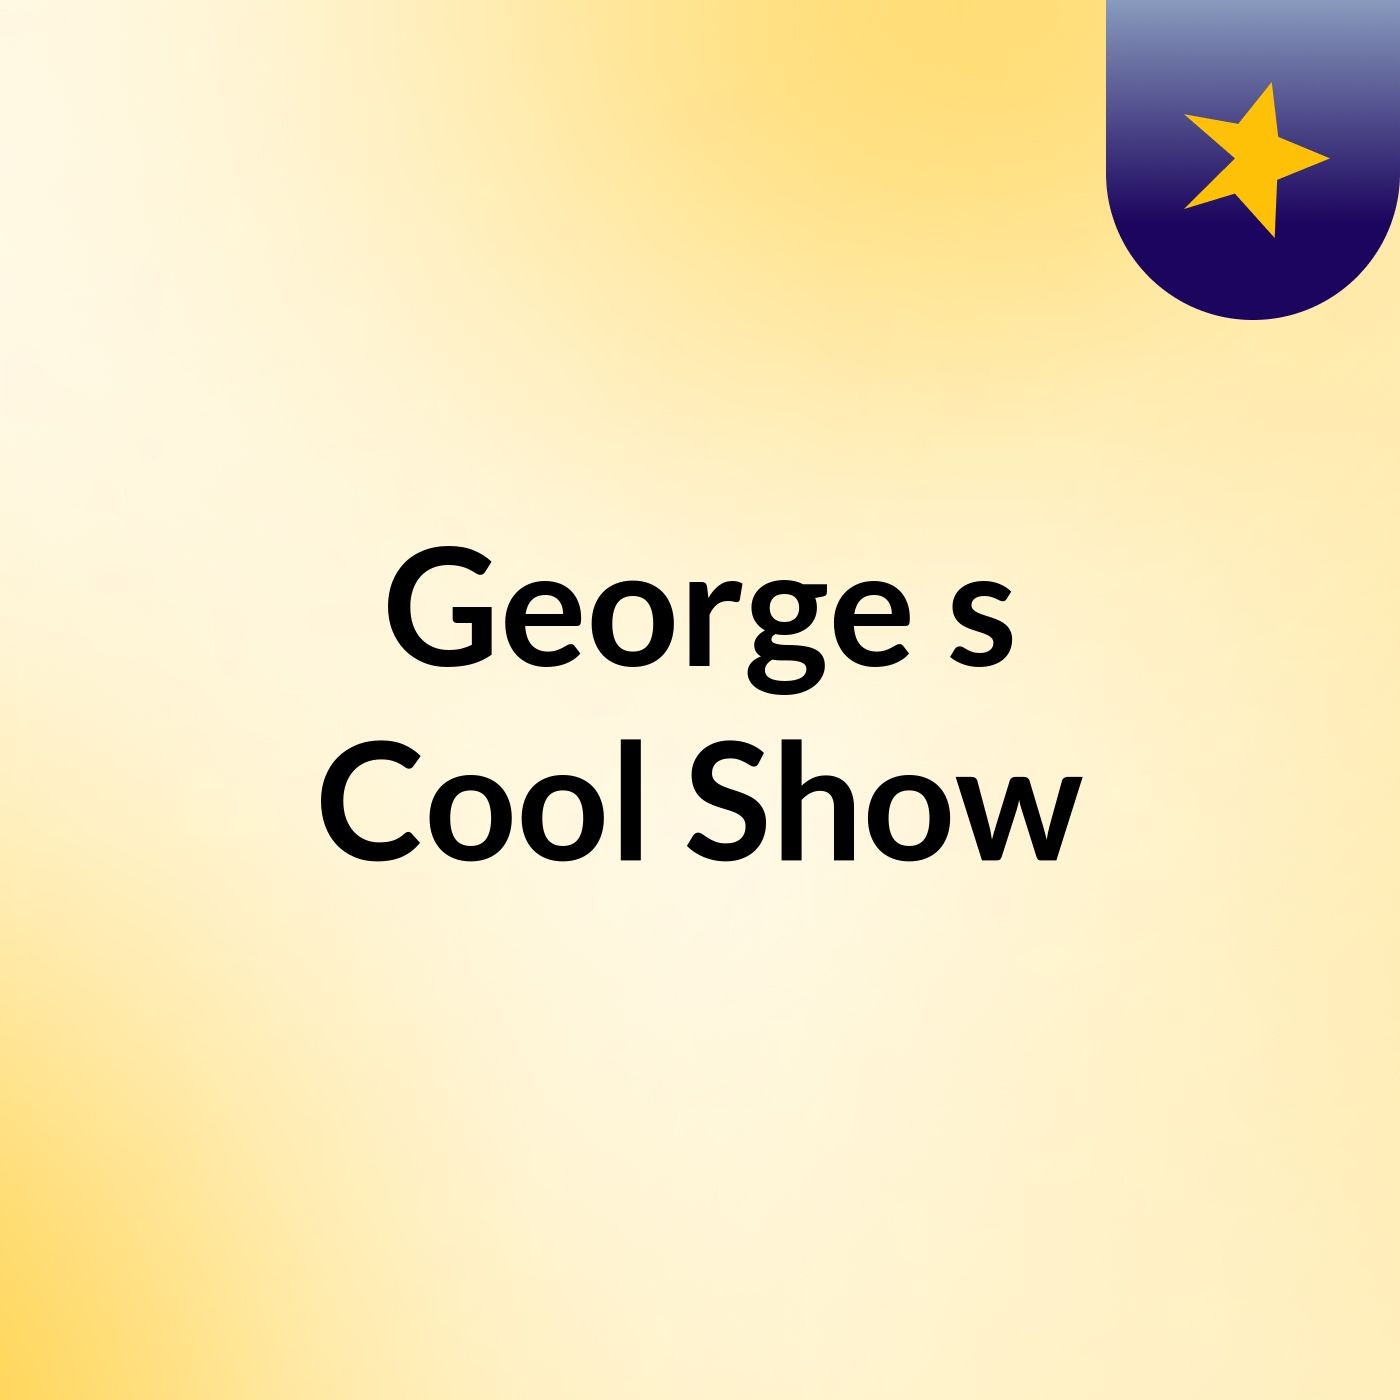 George's Cool Show